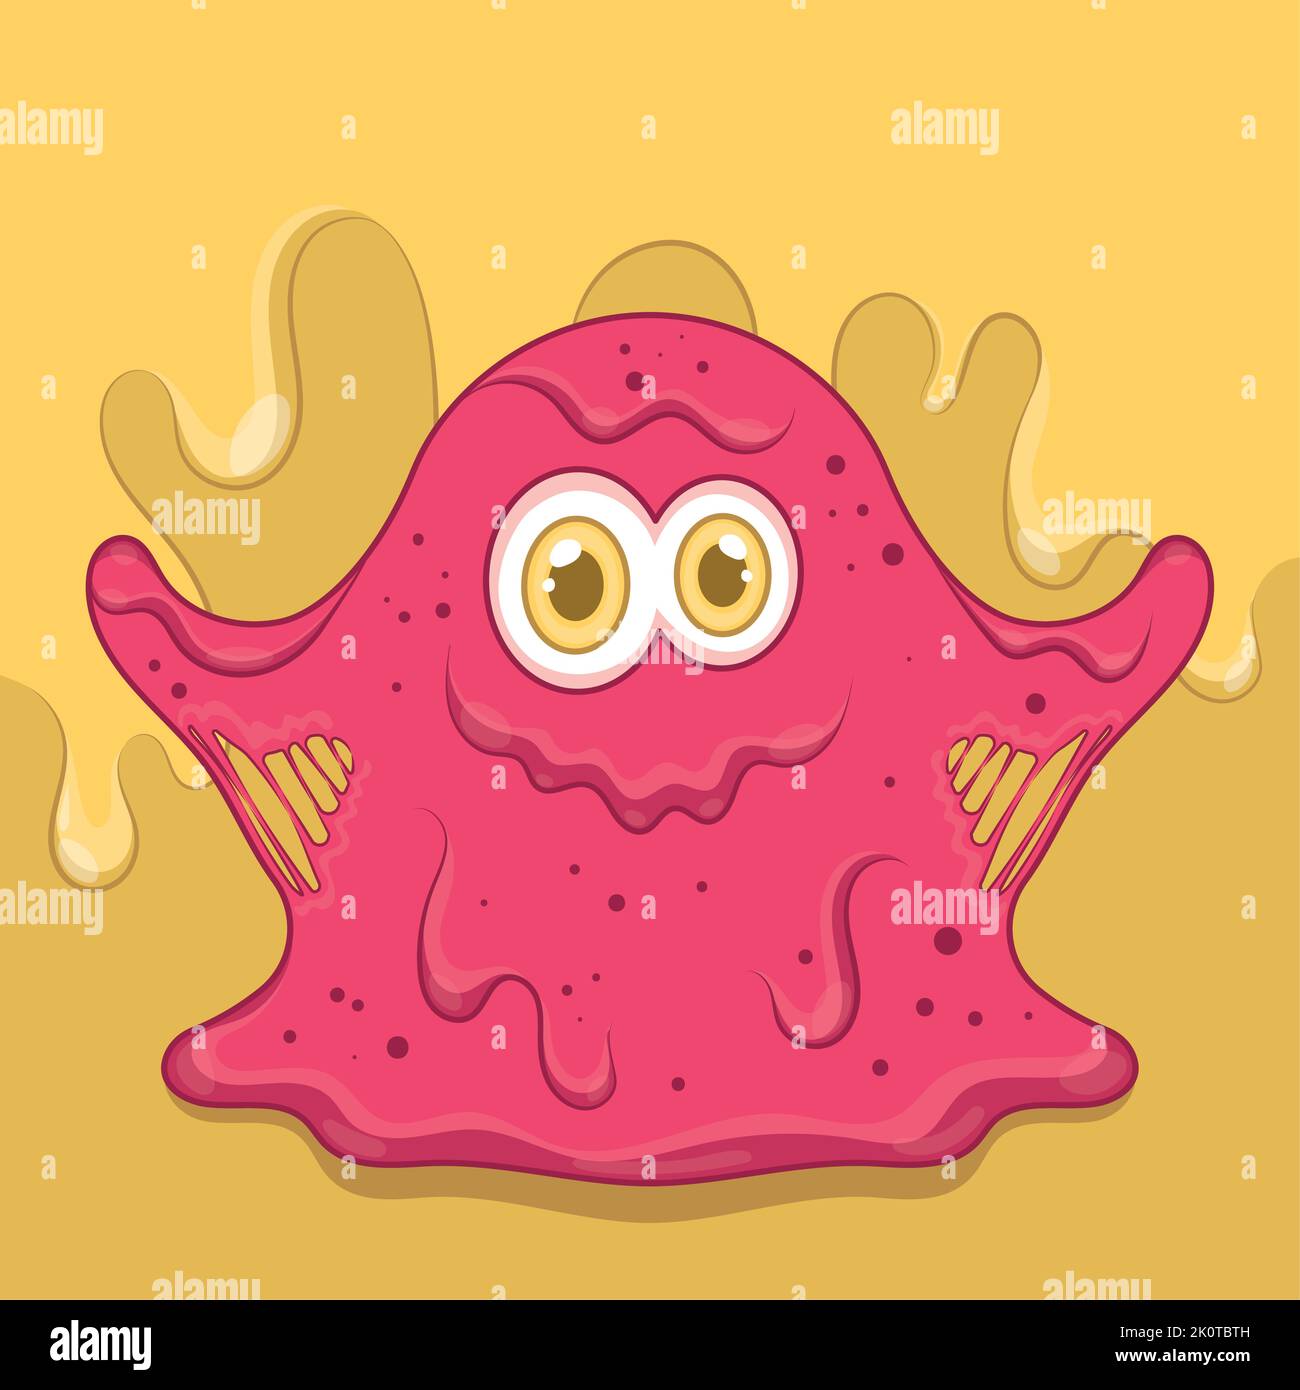 Monster Slime Coloring Page Colored Illustration - Stock